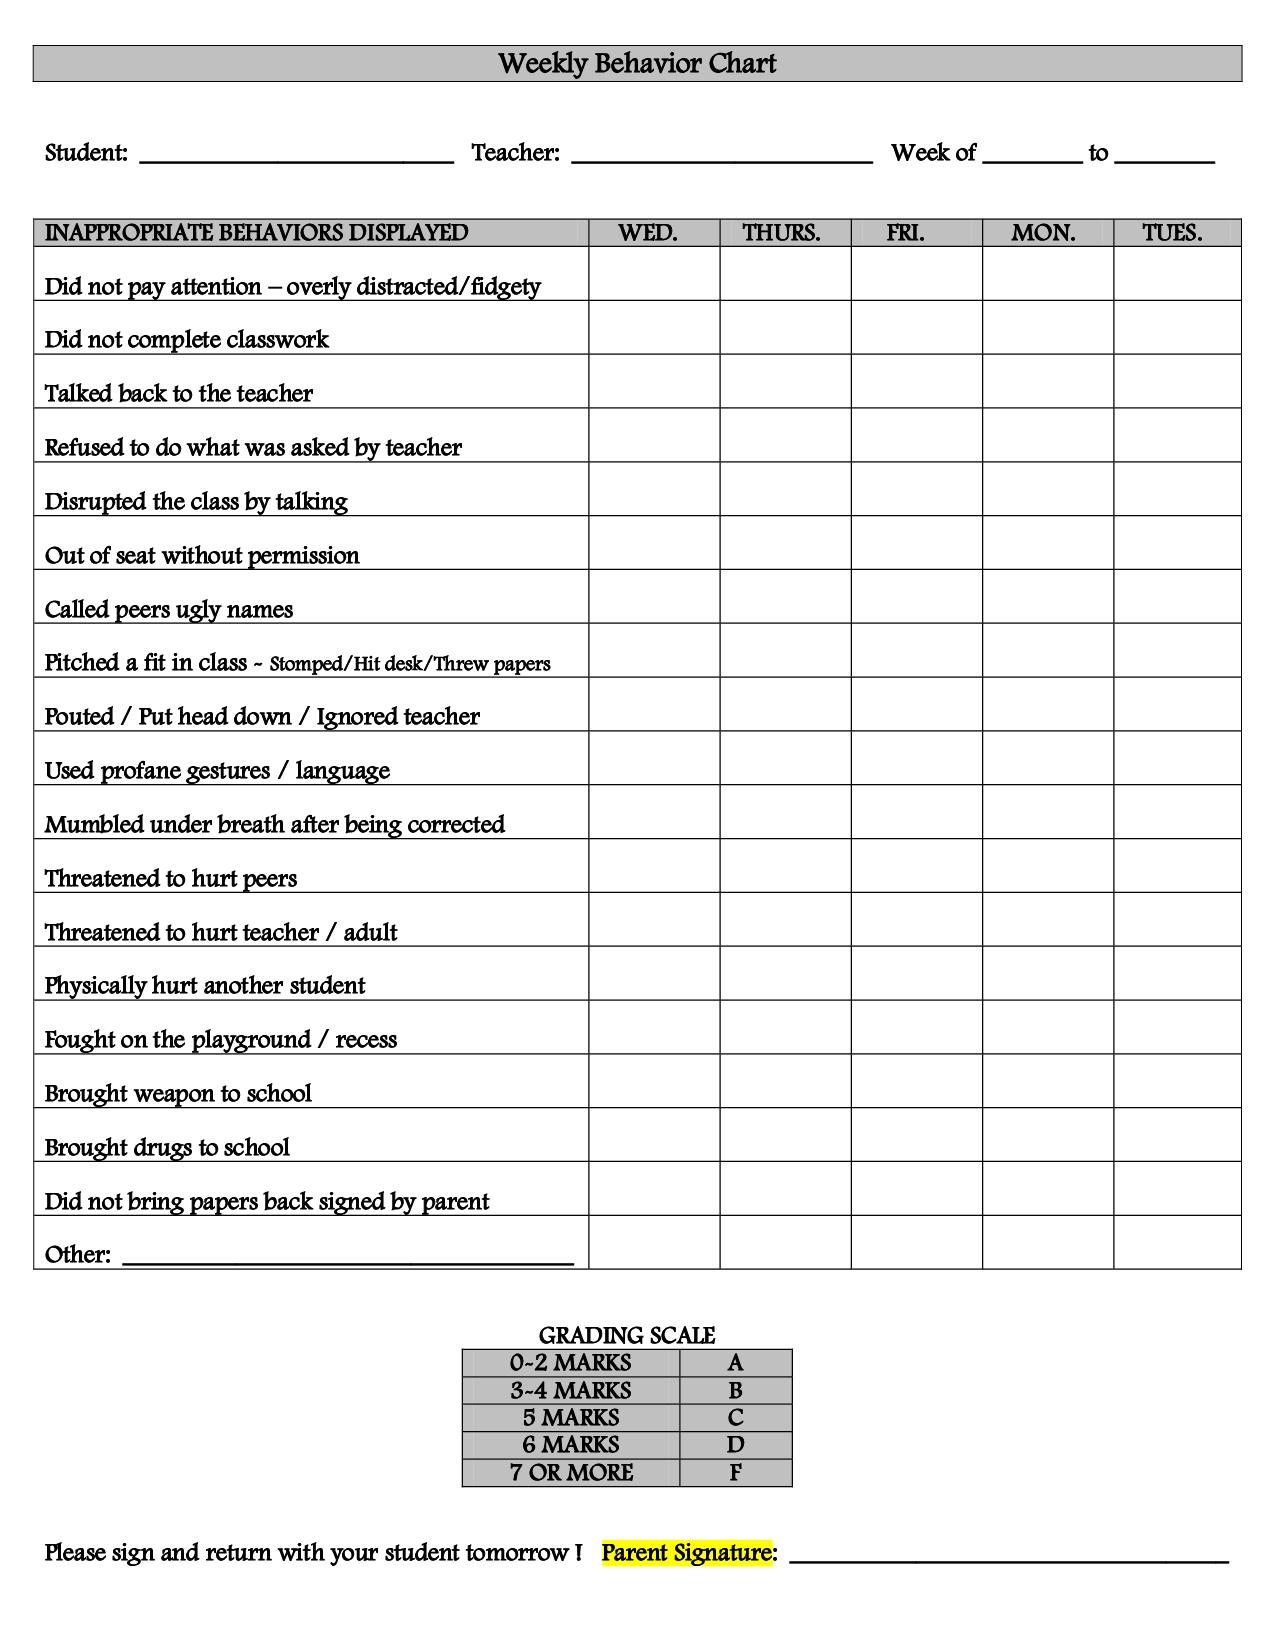 Weekly+Behavior+Chart+Template | Learning Line | Weekly Behavior regarding Free Printable Behavior Chart Templates